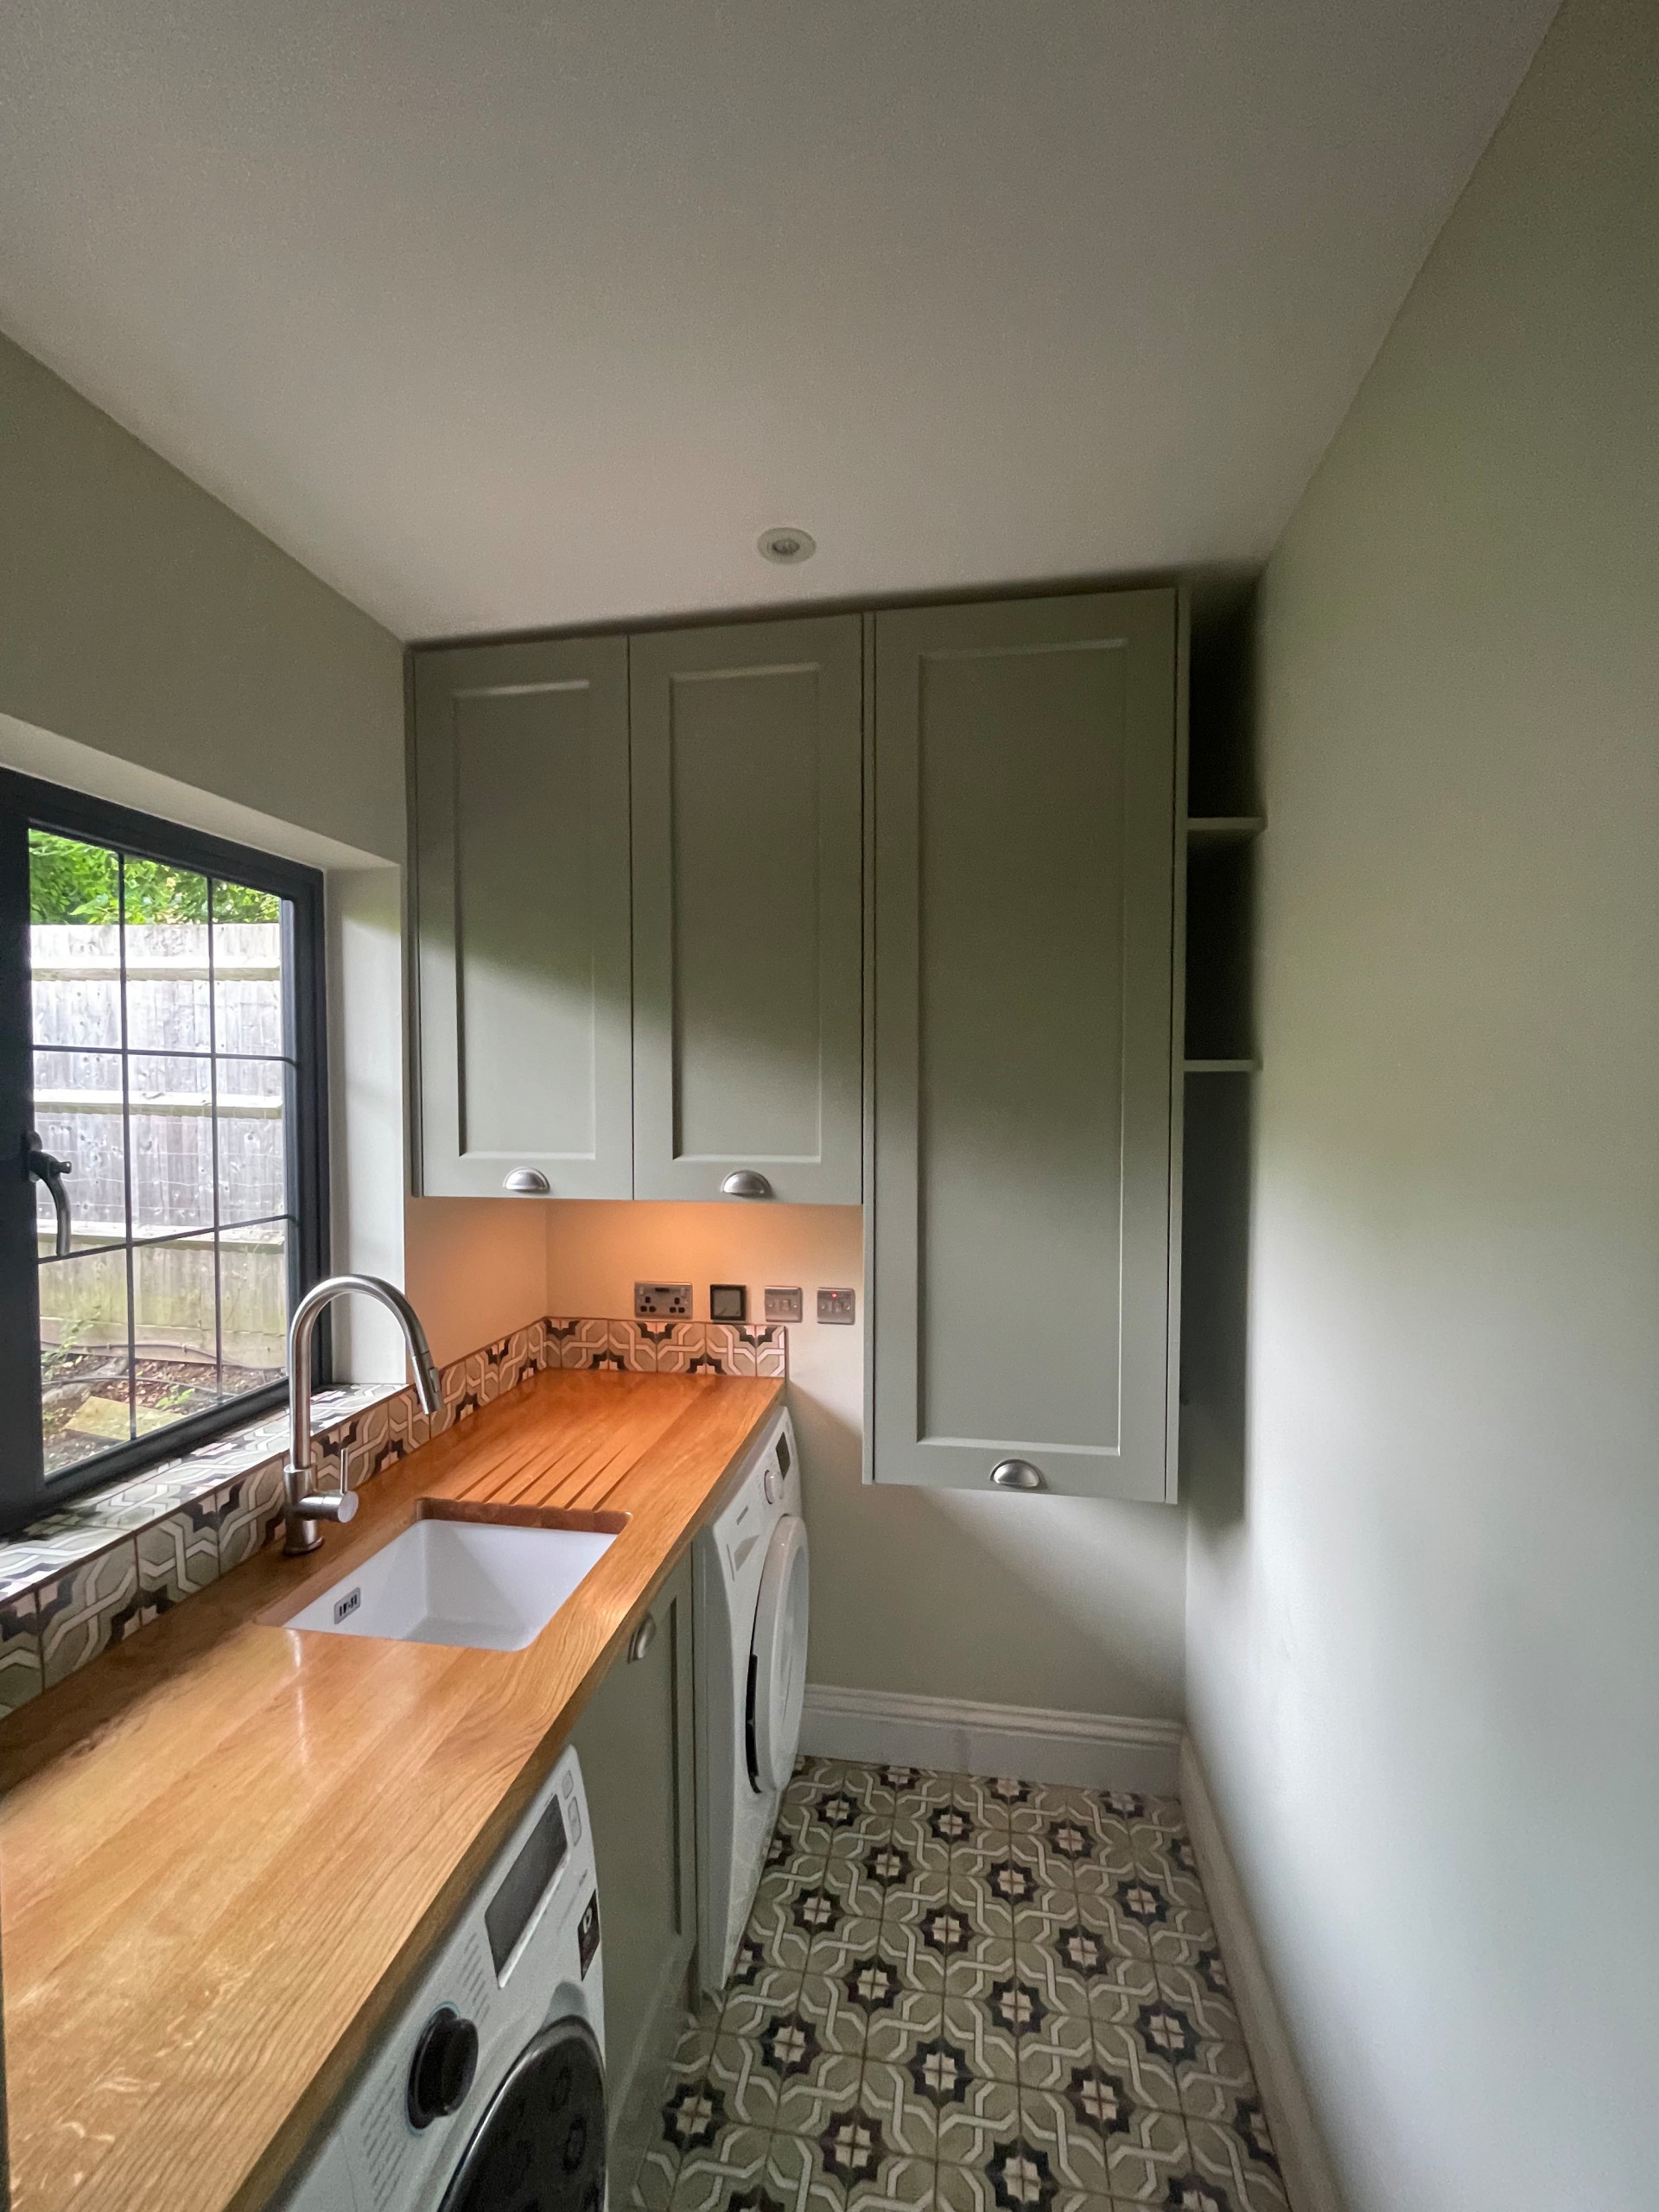 Bespoke cabinets for utility room